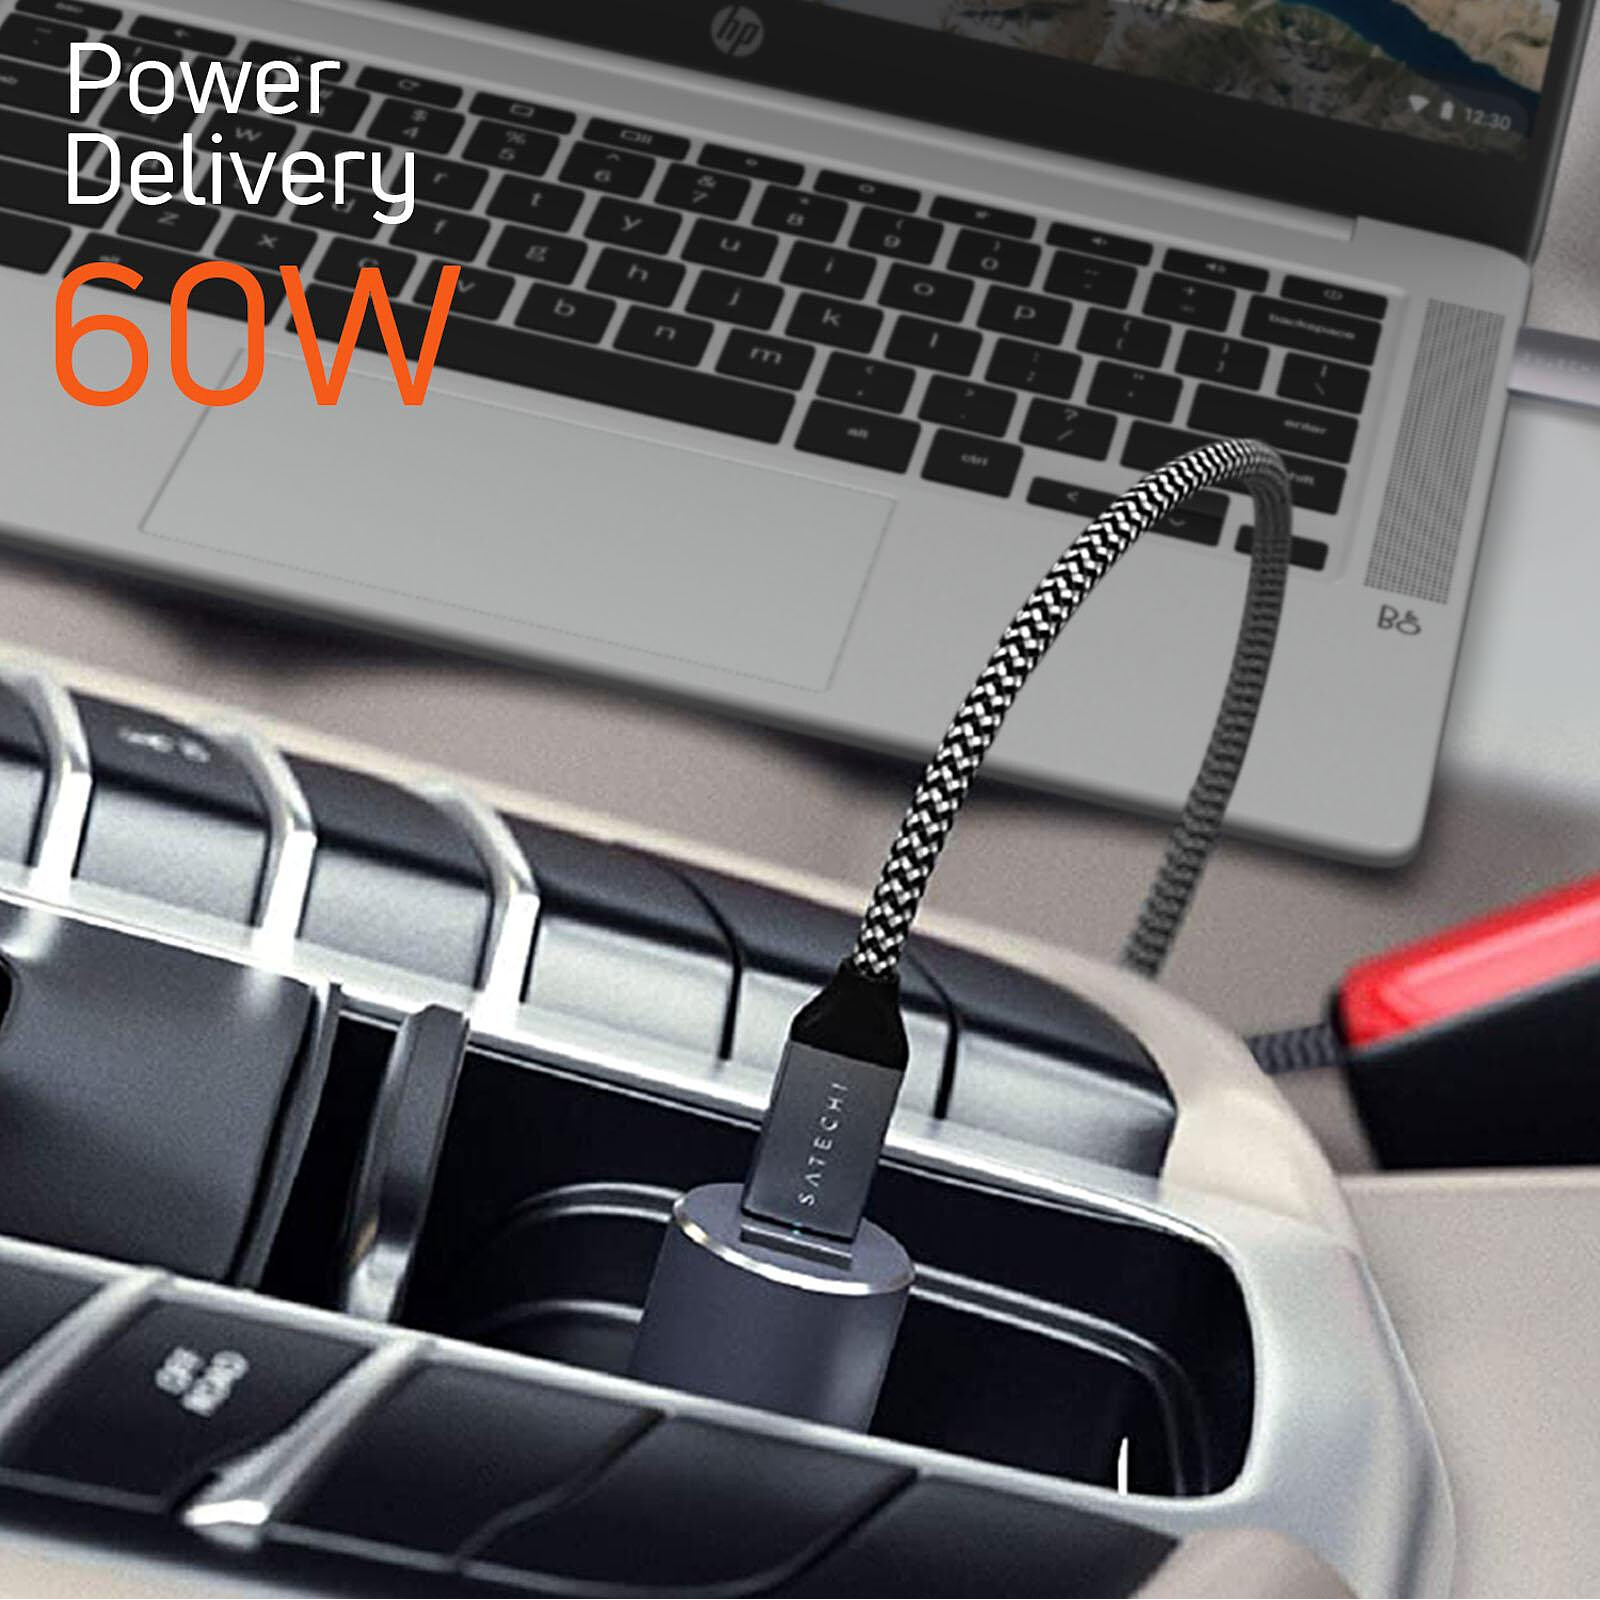 Satechi Chargeur Voiture 72W USB-C Power Delivery + USB Voyant LED Gris  Sidéral - Chargeur allume-cigare - LDLC